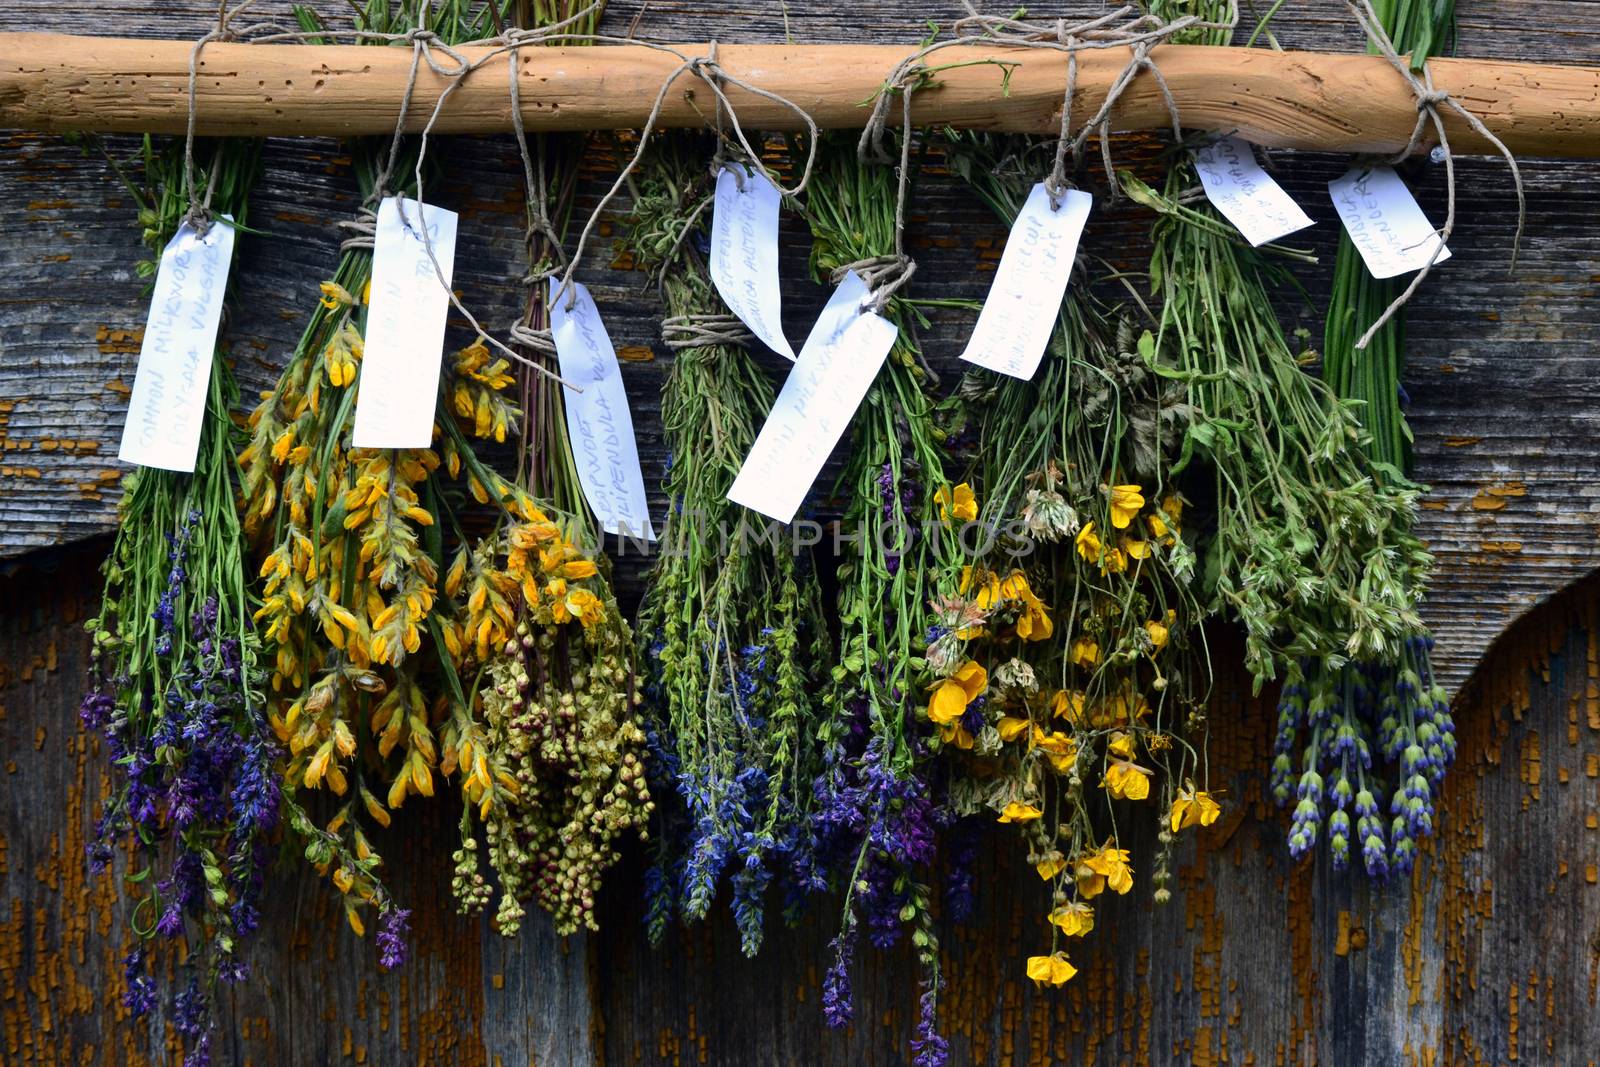 Bunches of dry herbal plants hanging on old wooden wall